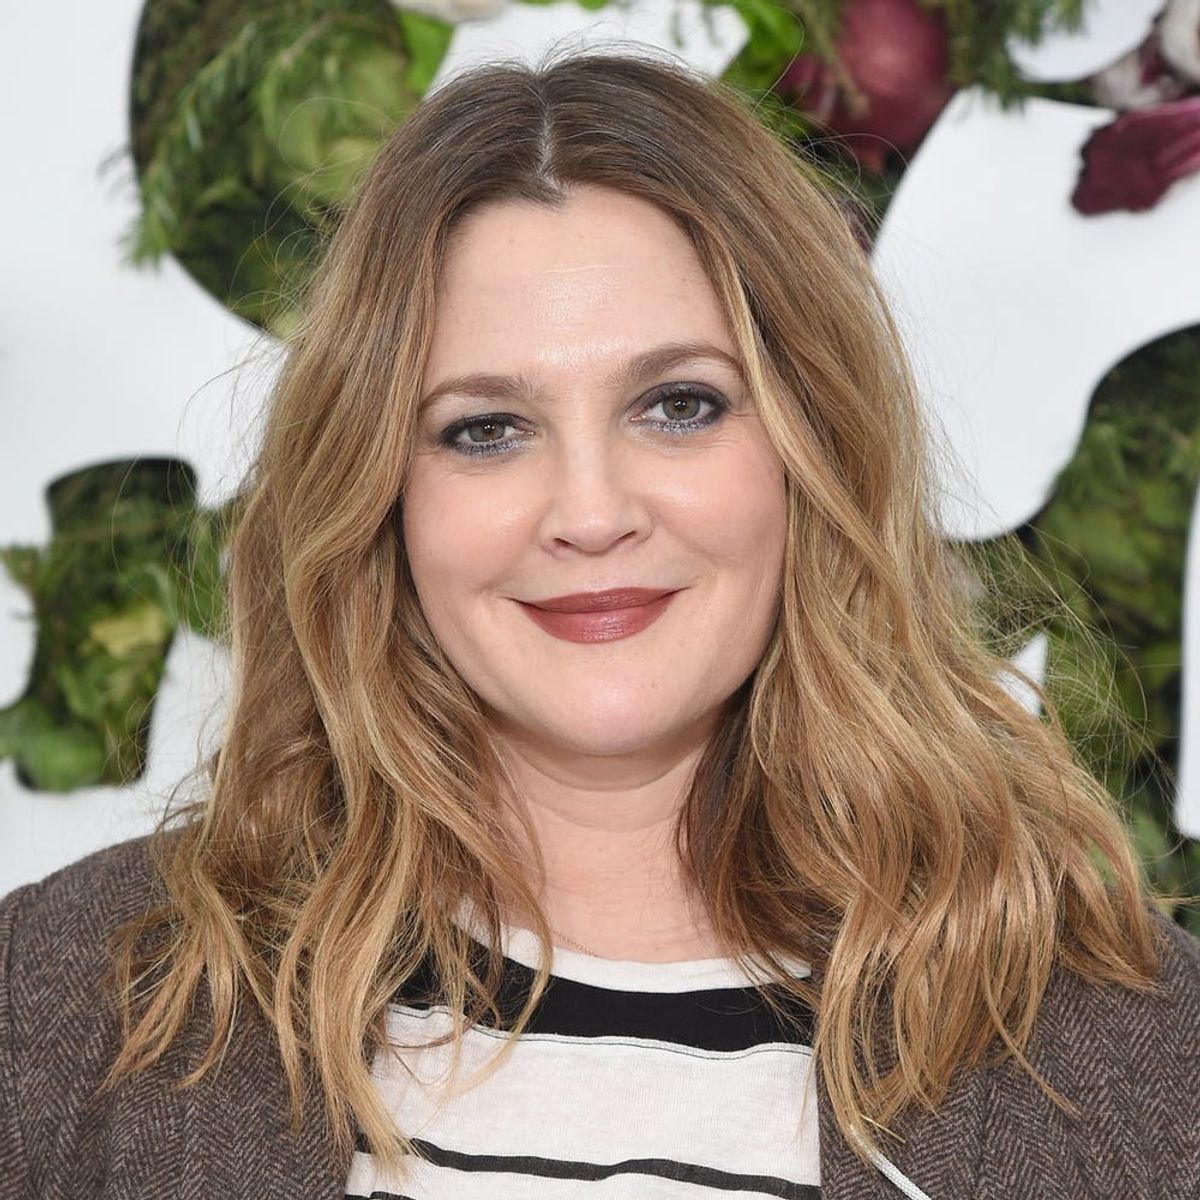 Drew Barrymore Made a Super Cute Line for Crocs and Now We’re Ready for Spring